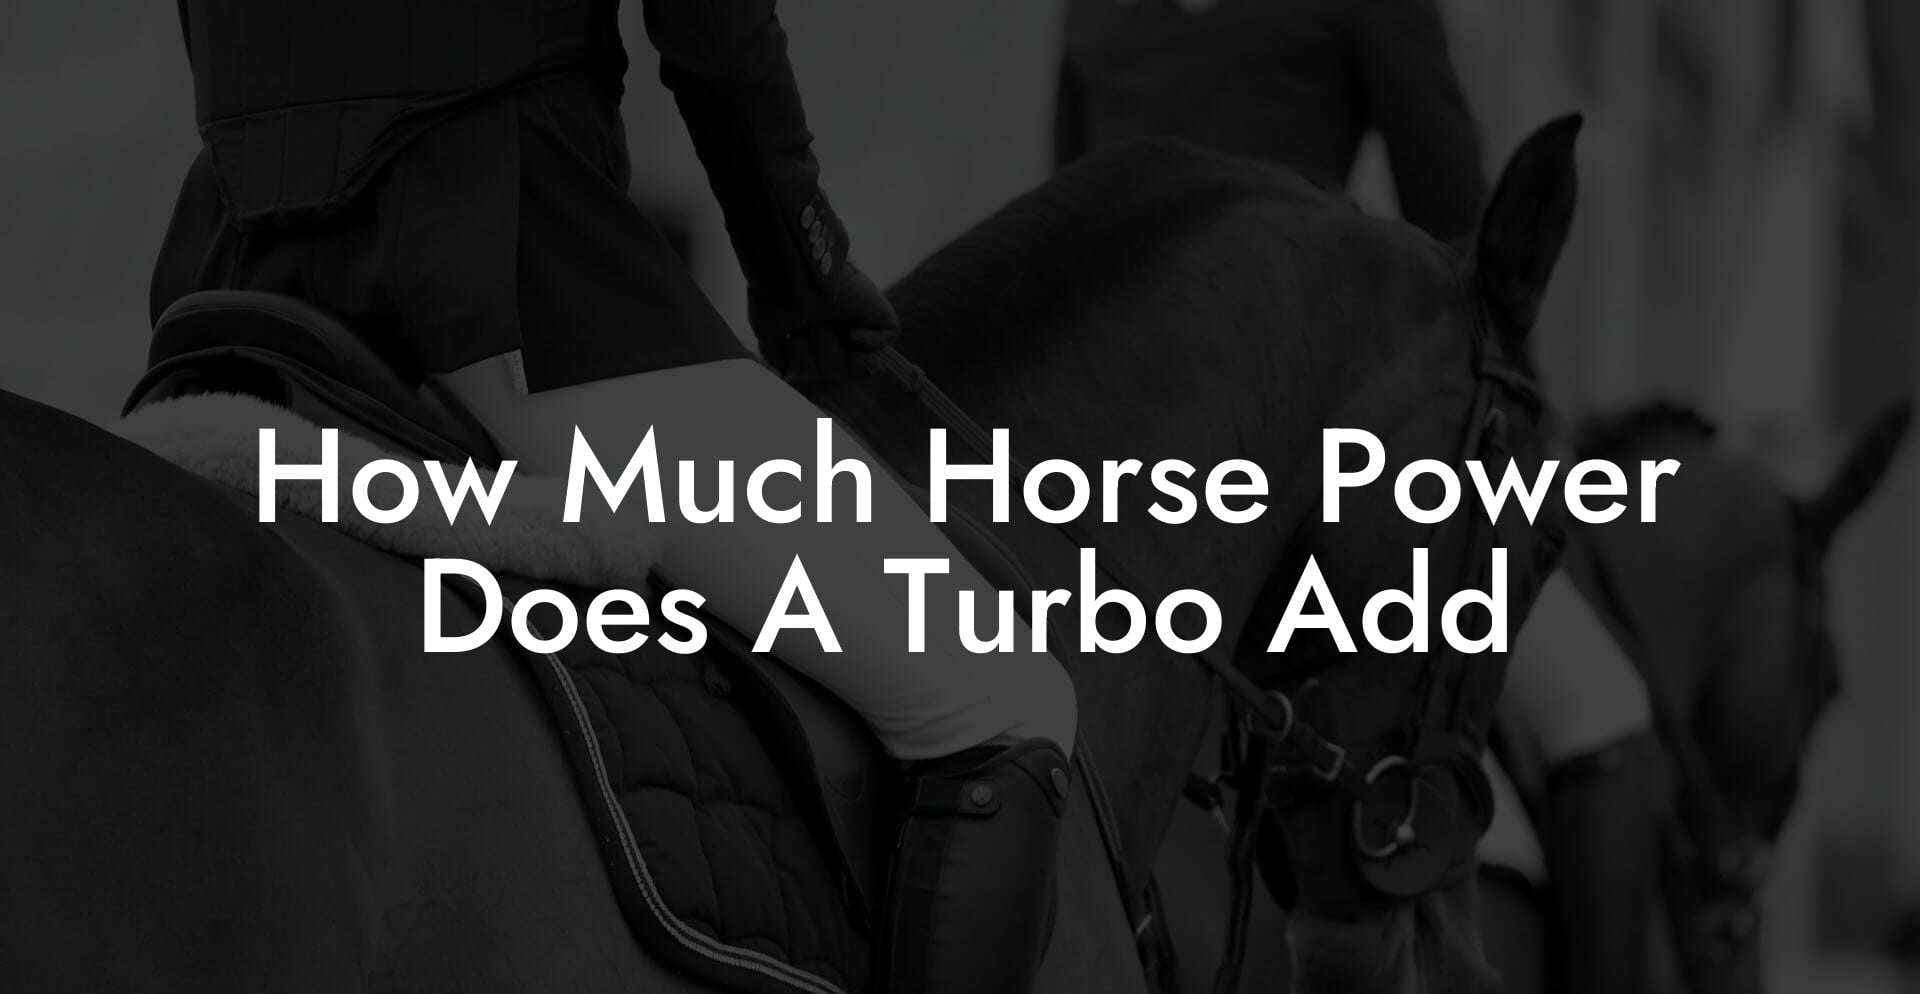 How Much Horse Power Does A Turbo Add